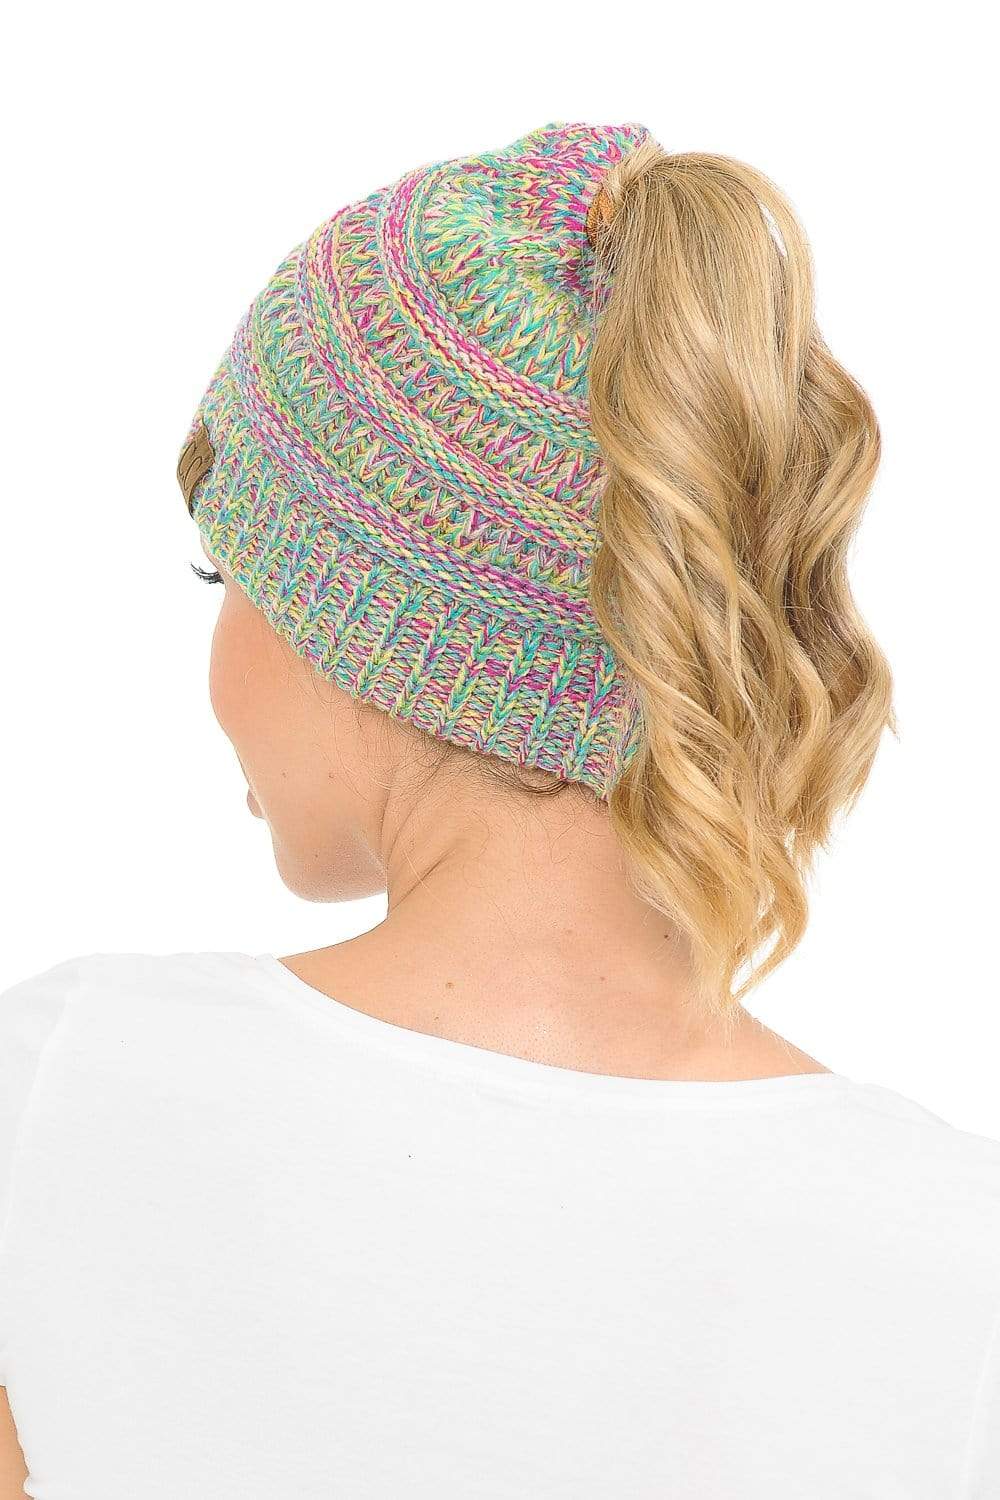 C.C Apparel C.C MB816 - Soft Stretch Cable Knit Warm Ponytail Hat 4 Toned Mixed Multi Color Beanie